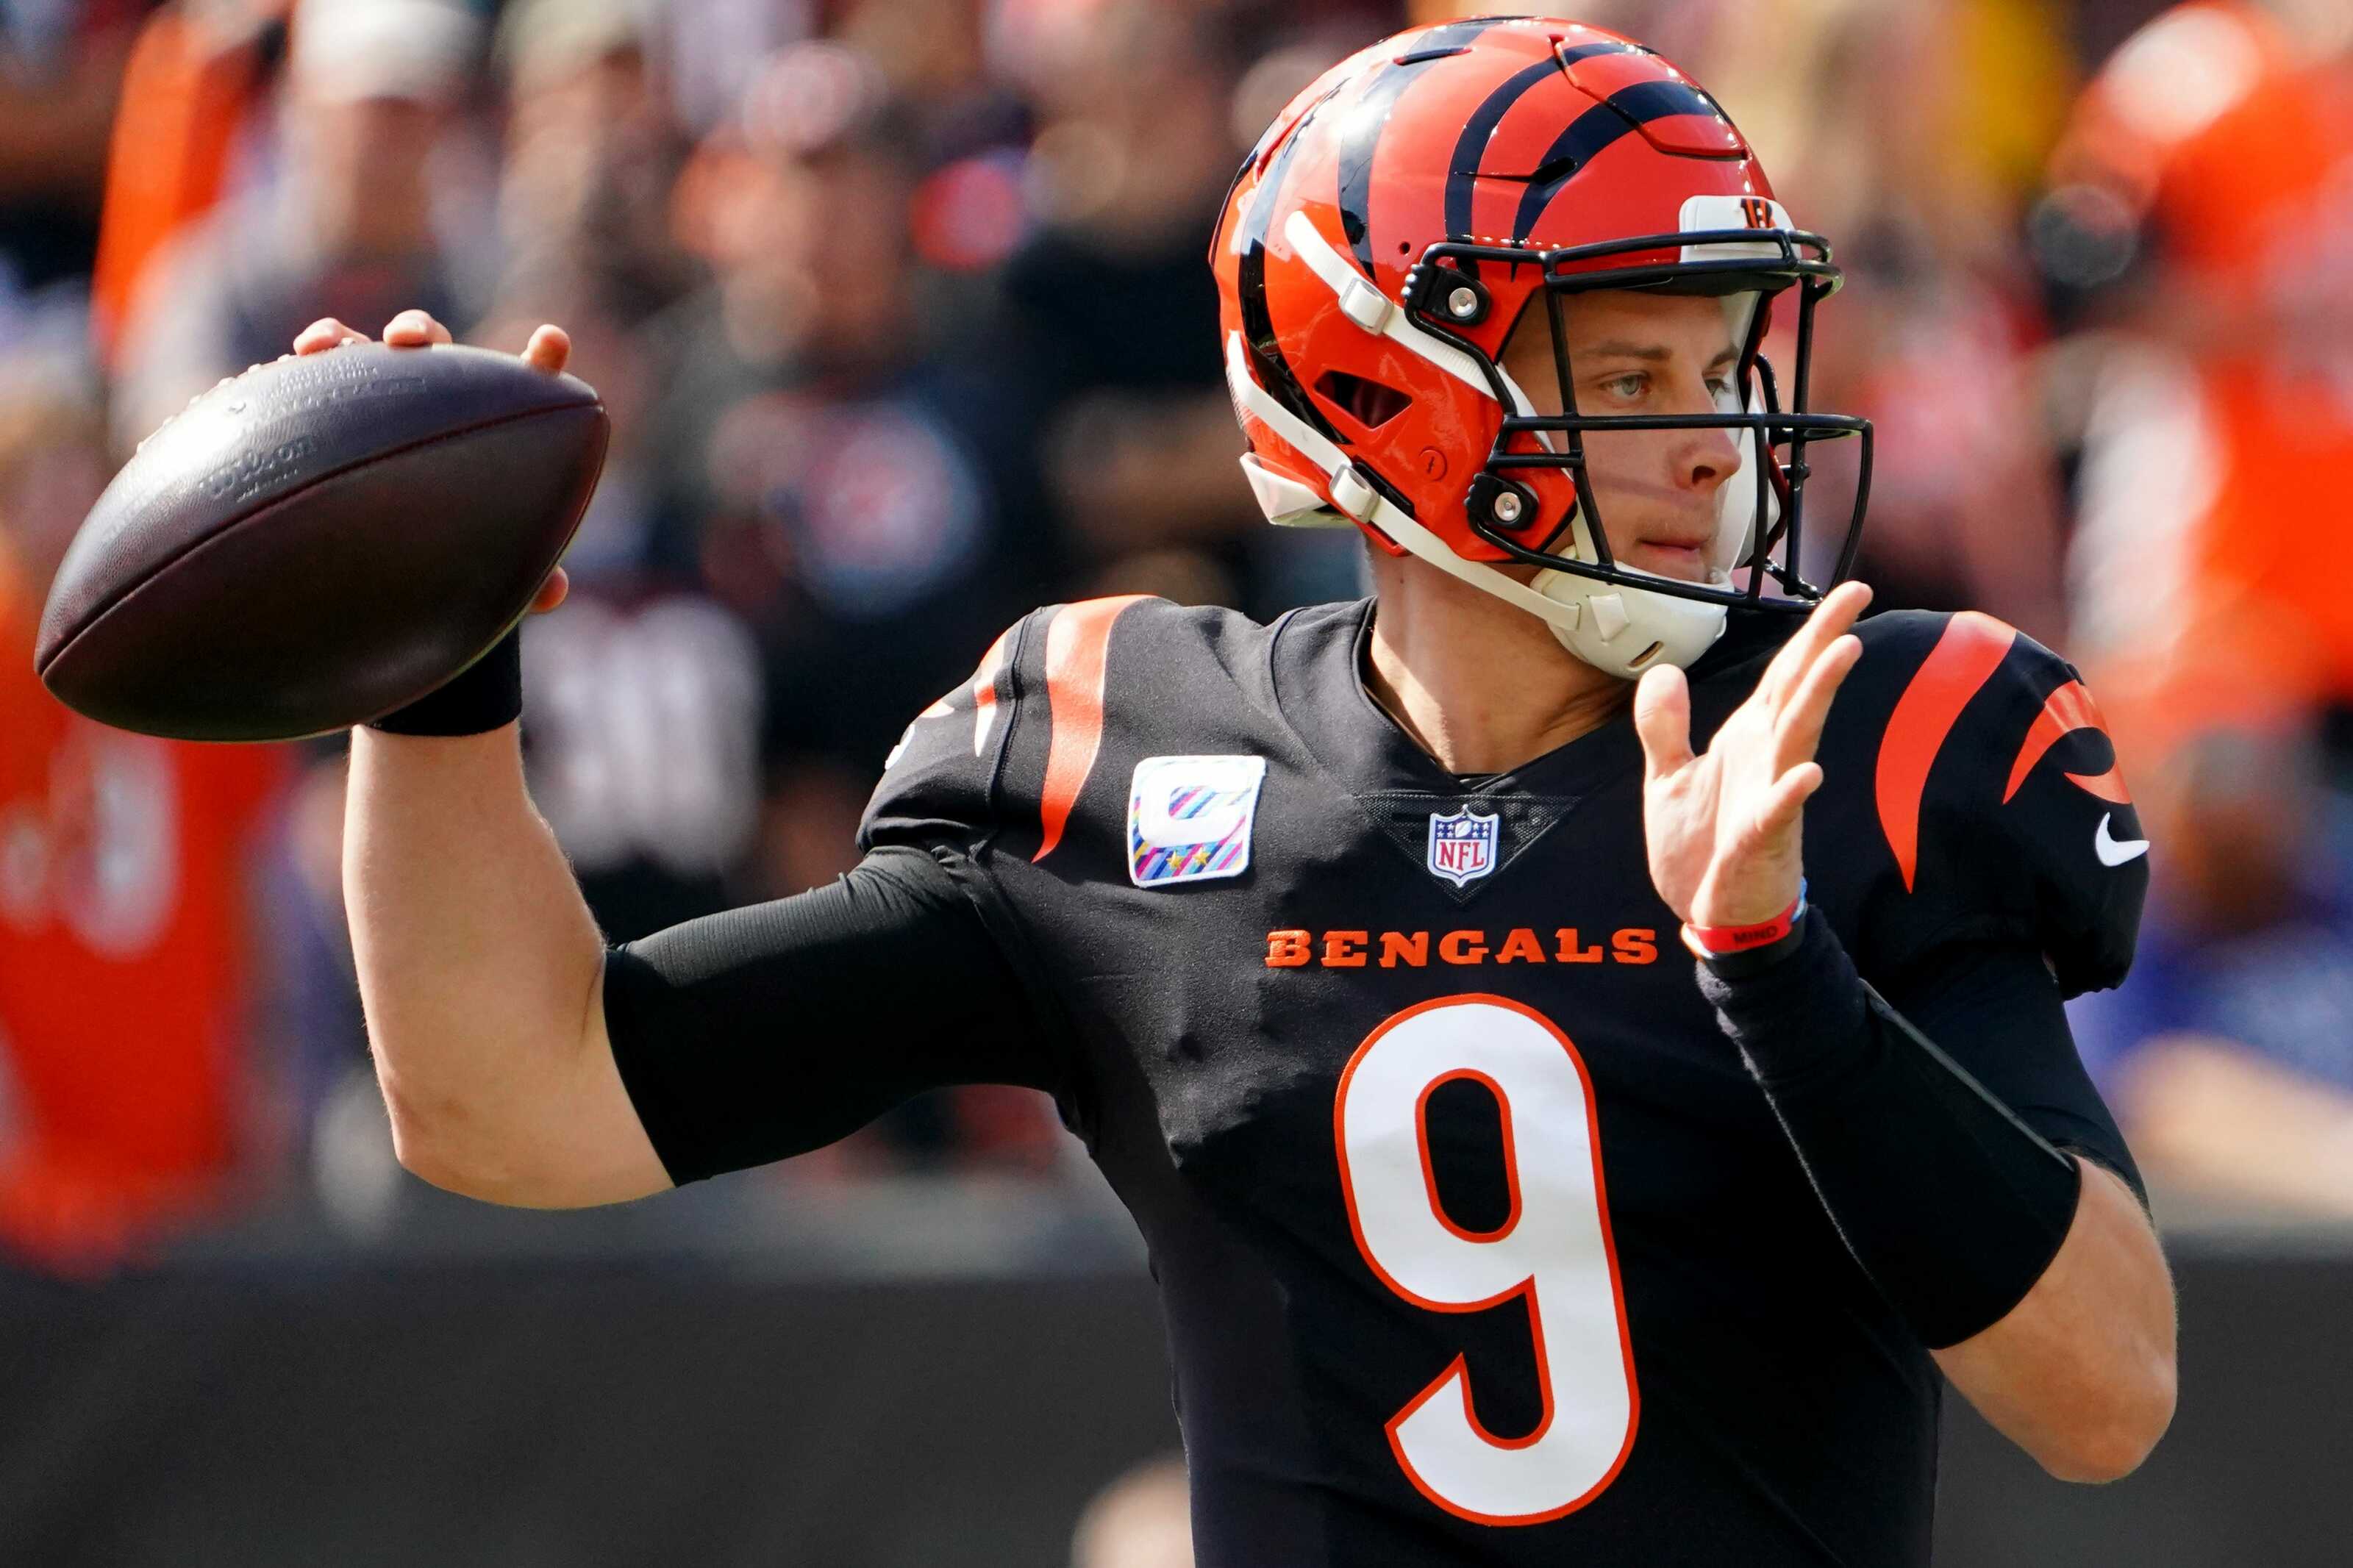 Detroit Lions vs. Bengals: Week 6 betting odds, spread, and prediction